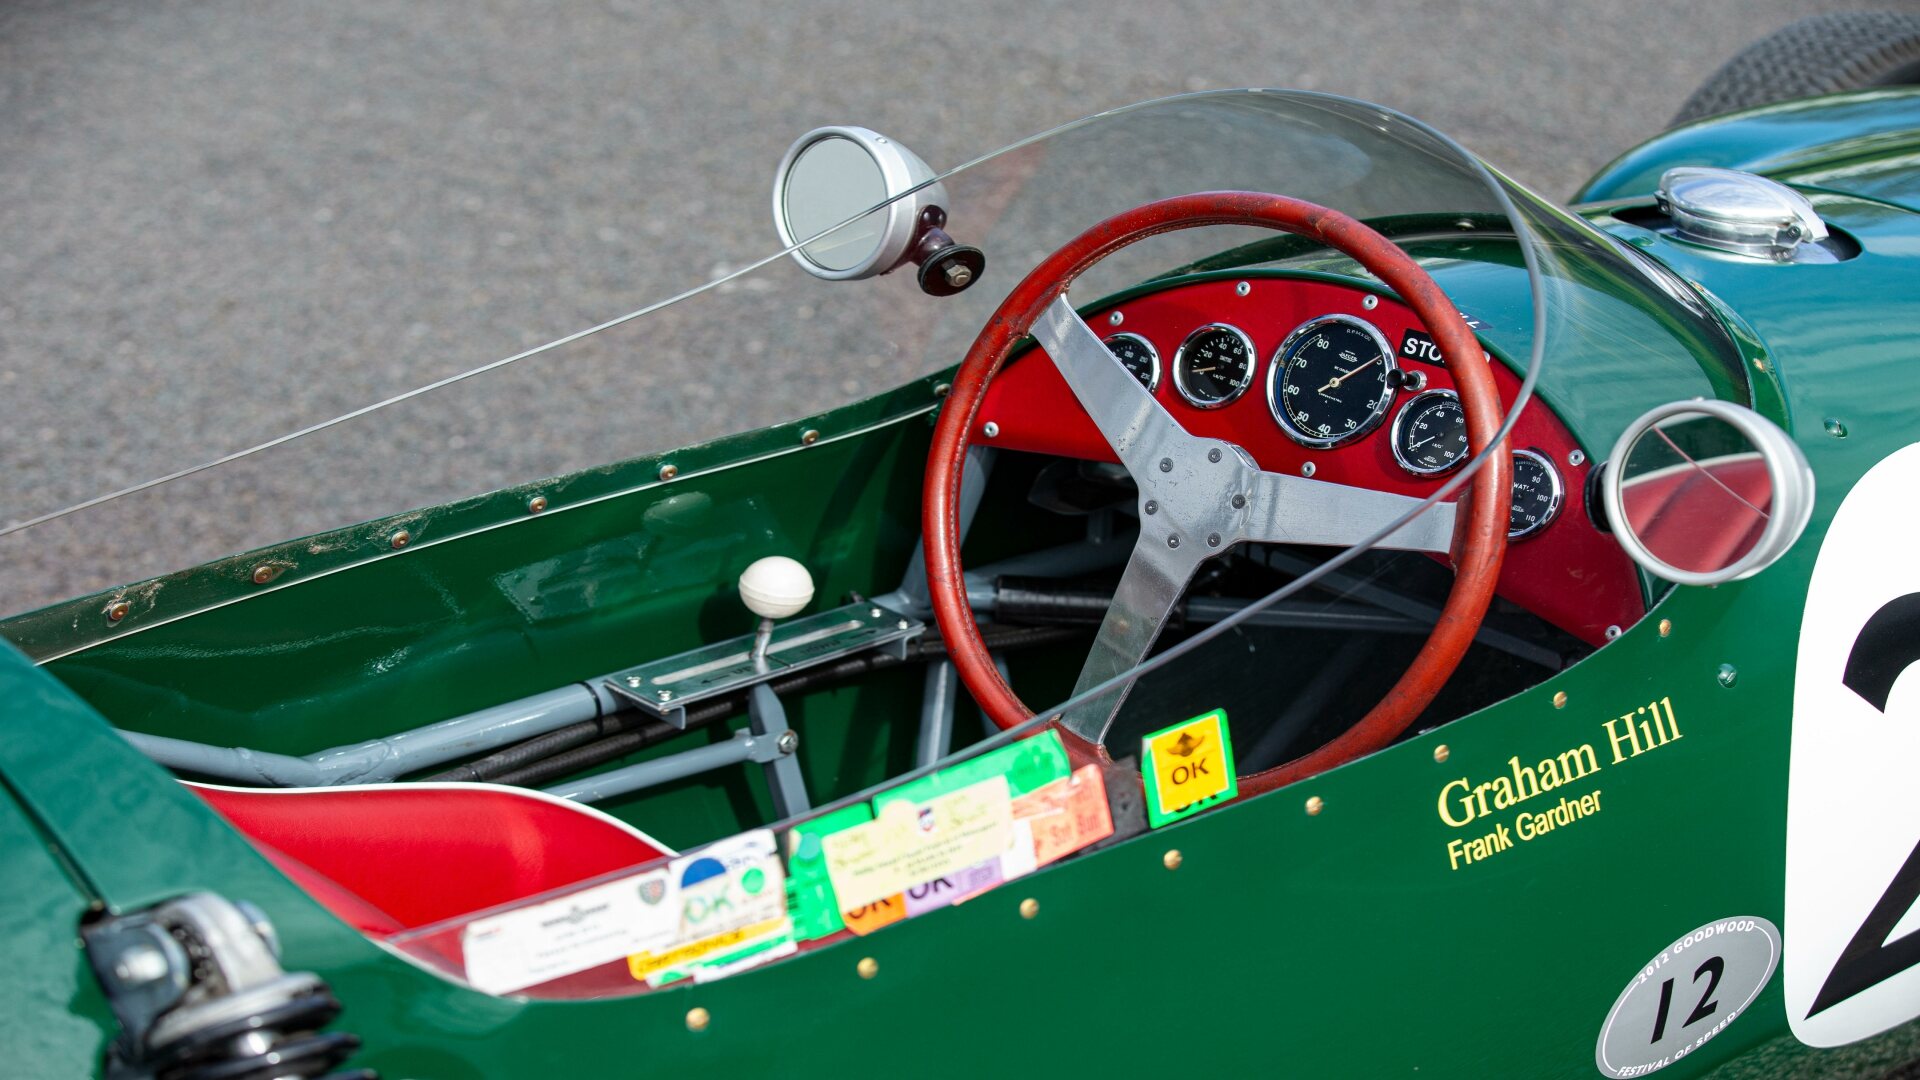 The Interior, Steering, Dashboard, And Central Console Of The First Lotus Formula 1 Race Car (Credits Bonhams)